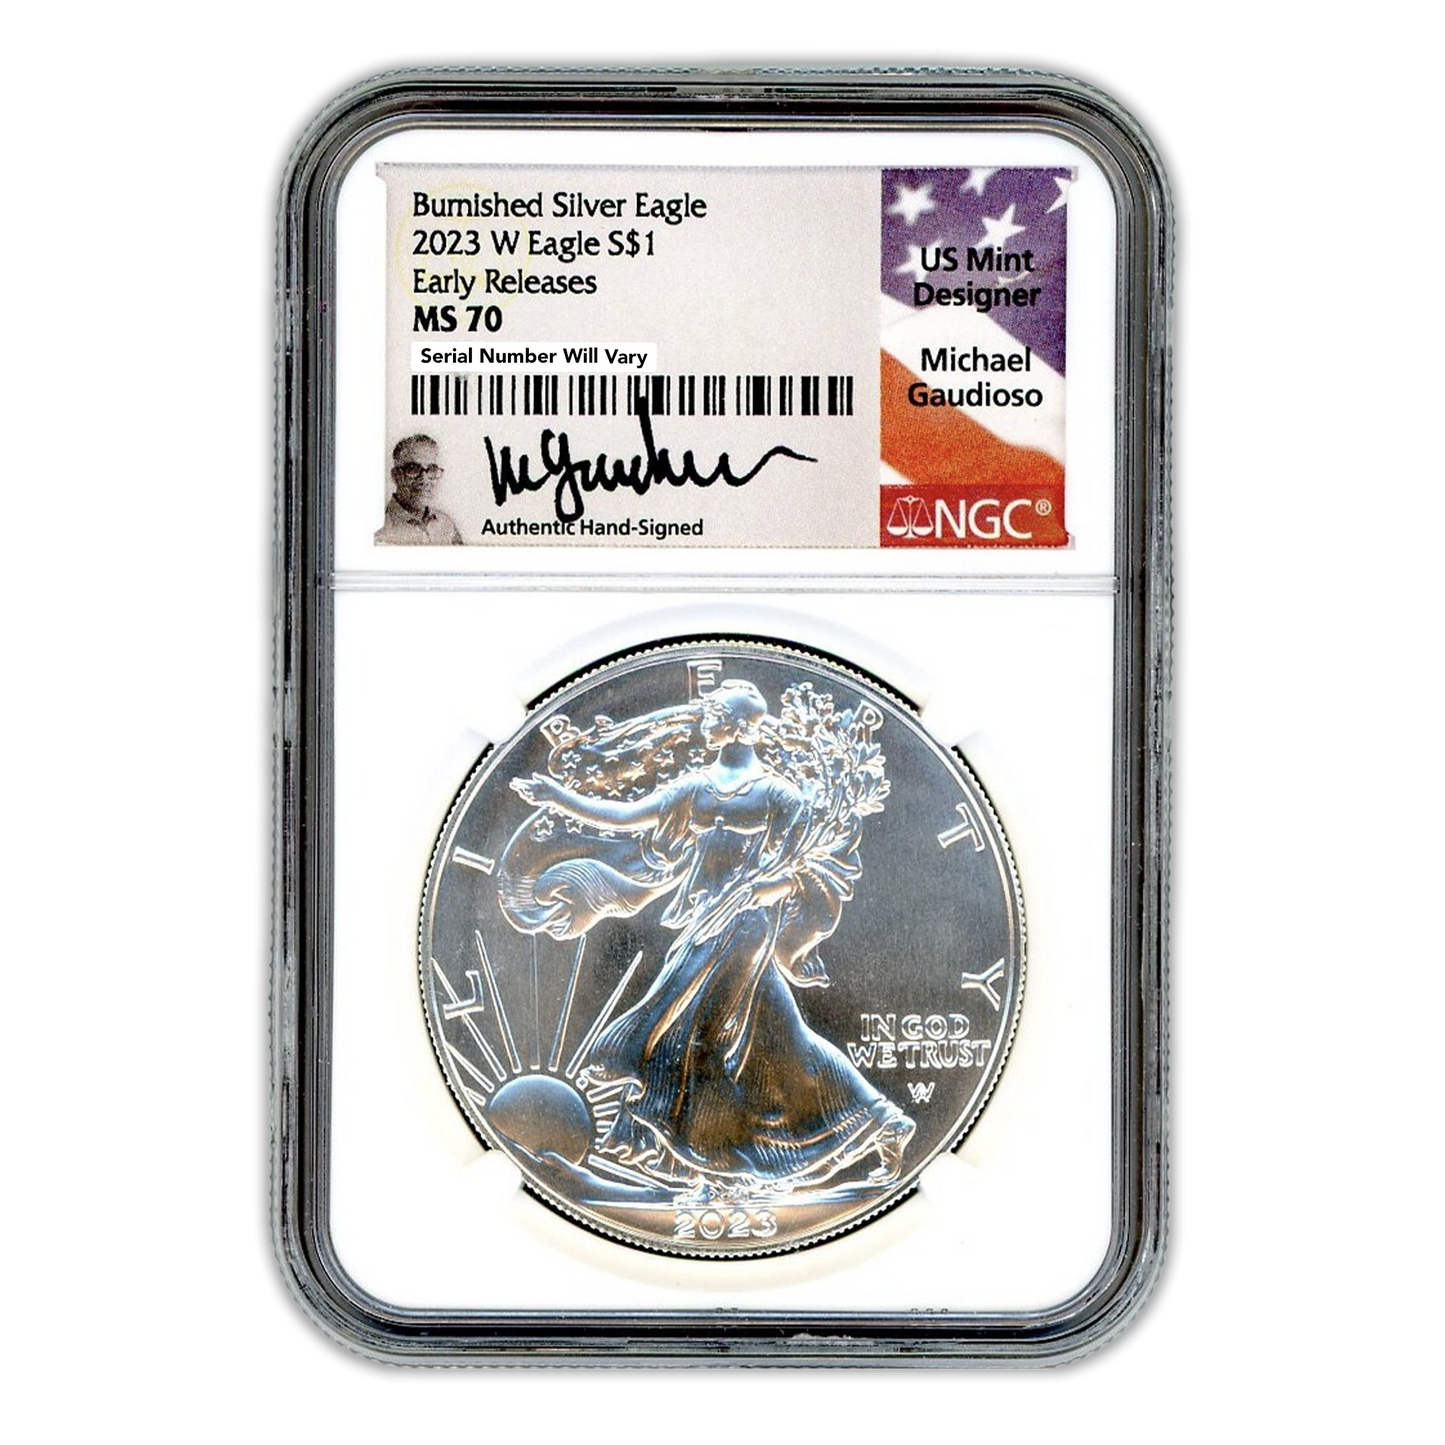 2023 W Silver Eagle Burnished - Early Releases - NGC MS70 Michael Gaudioso Signature Label